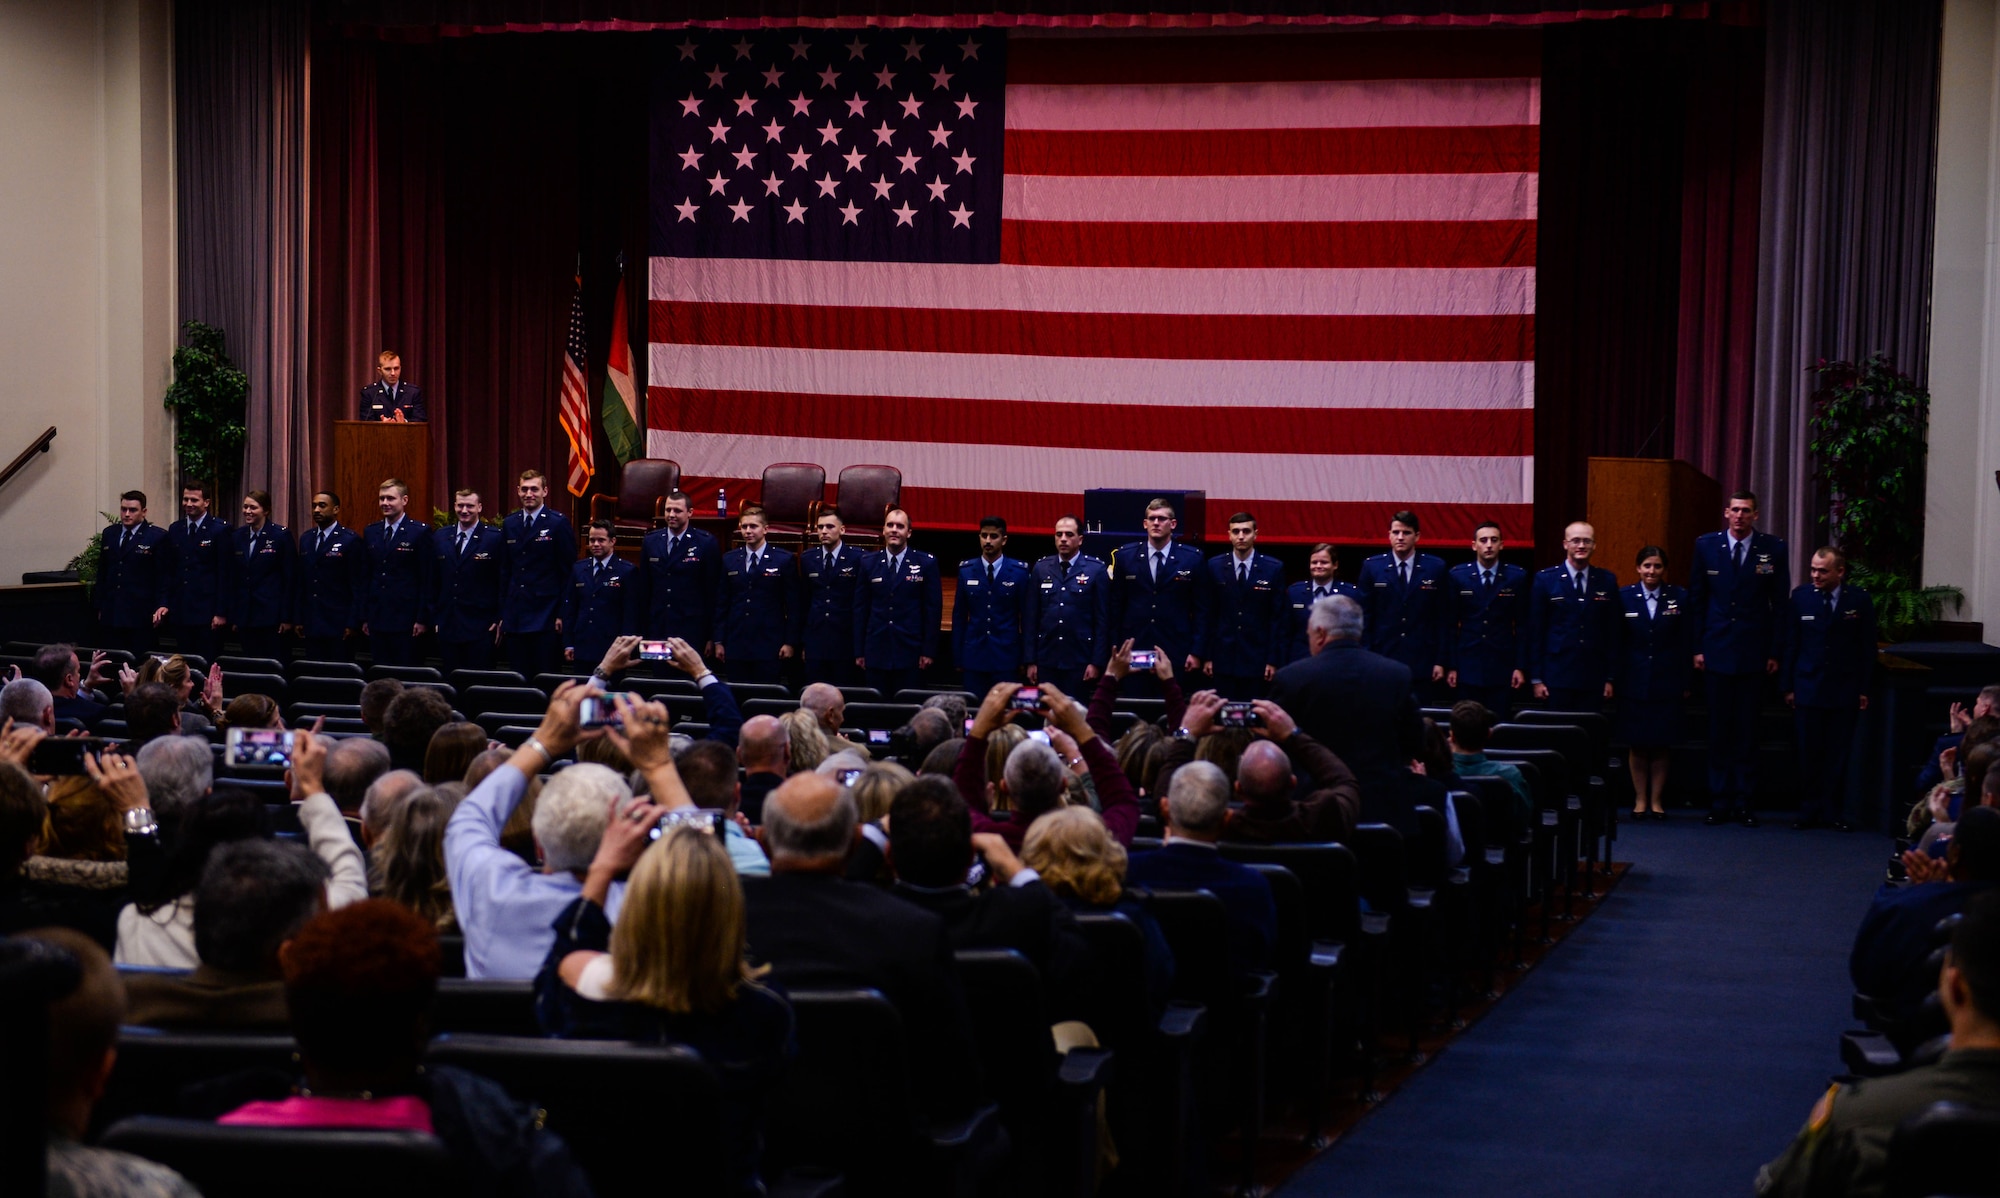 Specialized Undergraduate Pilot Training Class 20-03 are applauded by those in attendance during their graduation ceremony Nov. 15, 2019, at Columbus Air Force Base, Miss. Aviators receive their pilot “silver wings” upon graduation from pilot training. (U.S. Air Force photo by Airman Davis Donaldson)